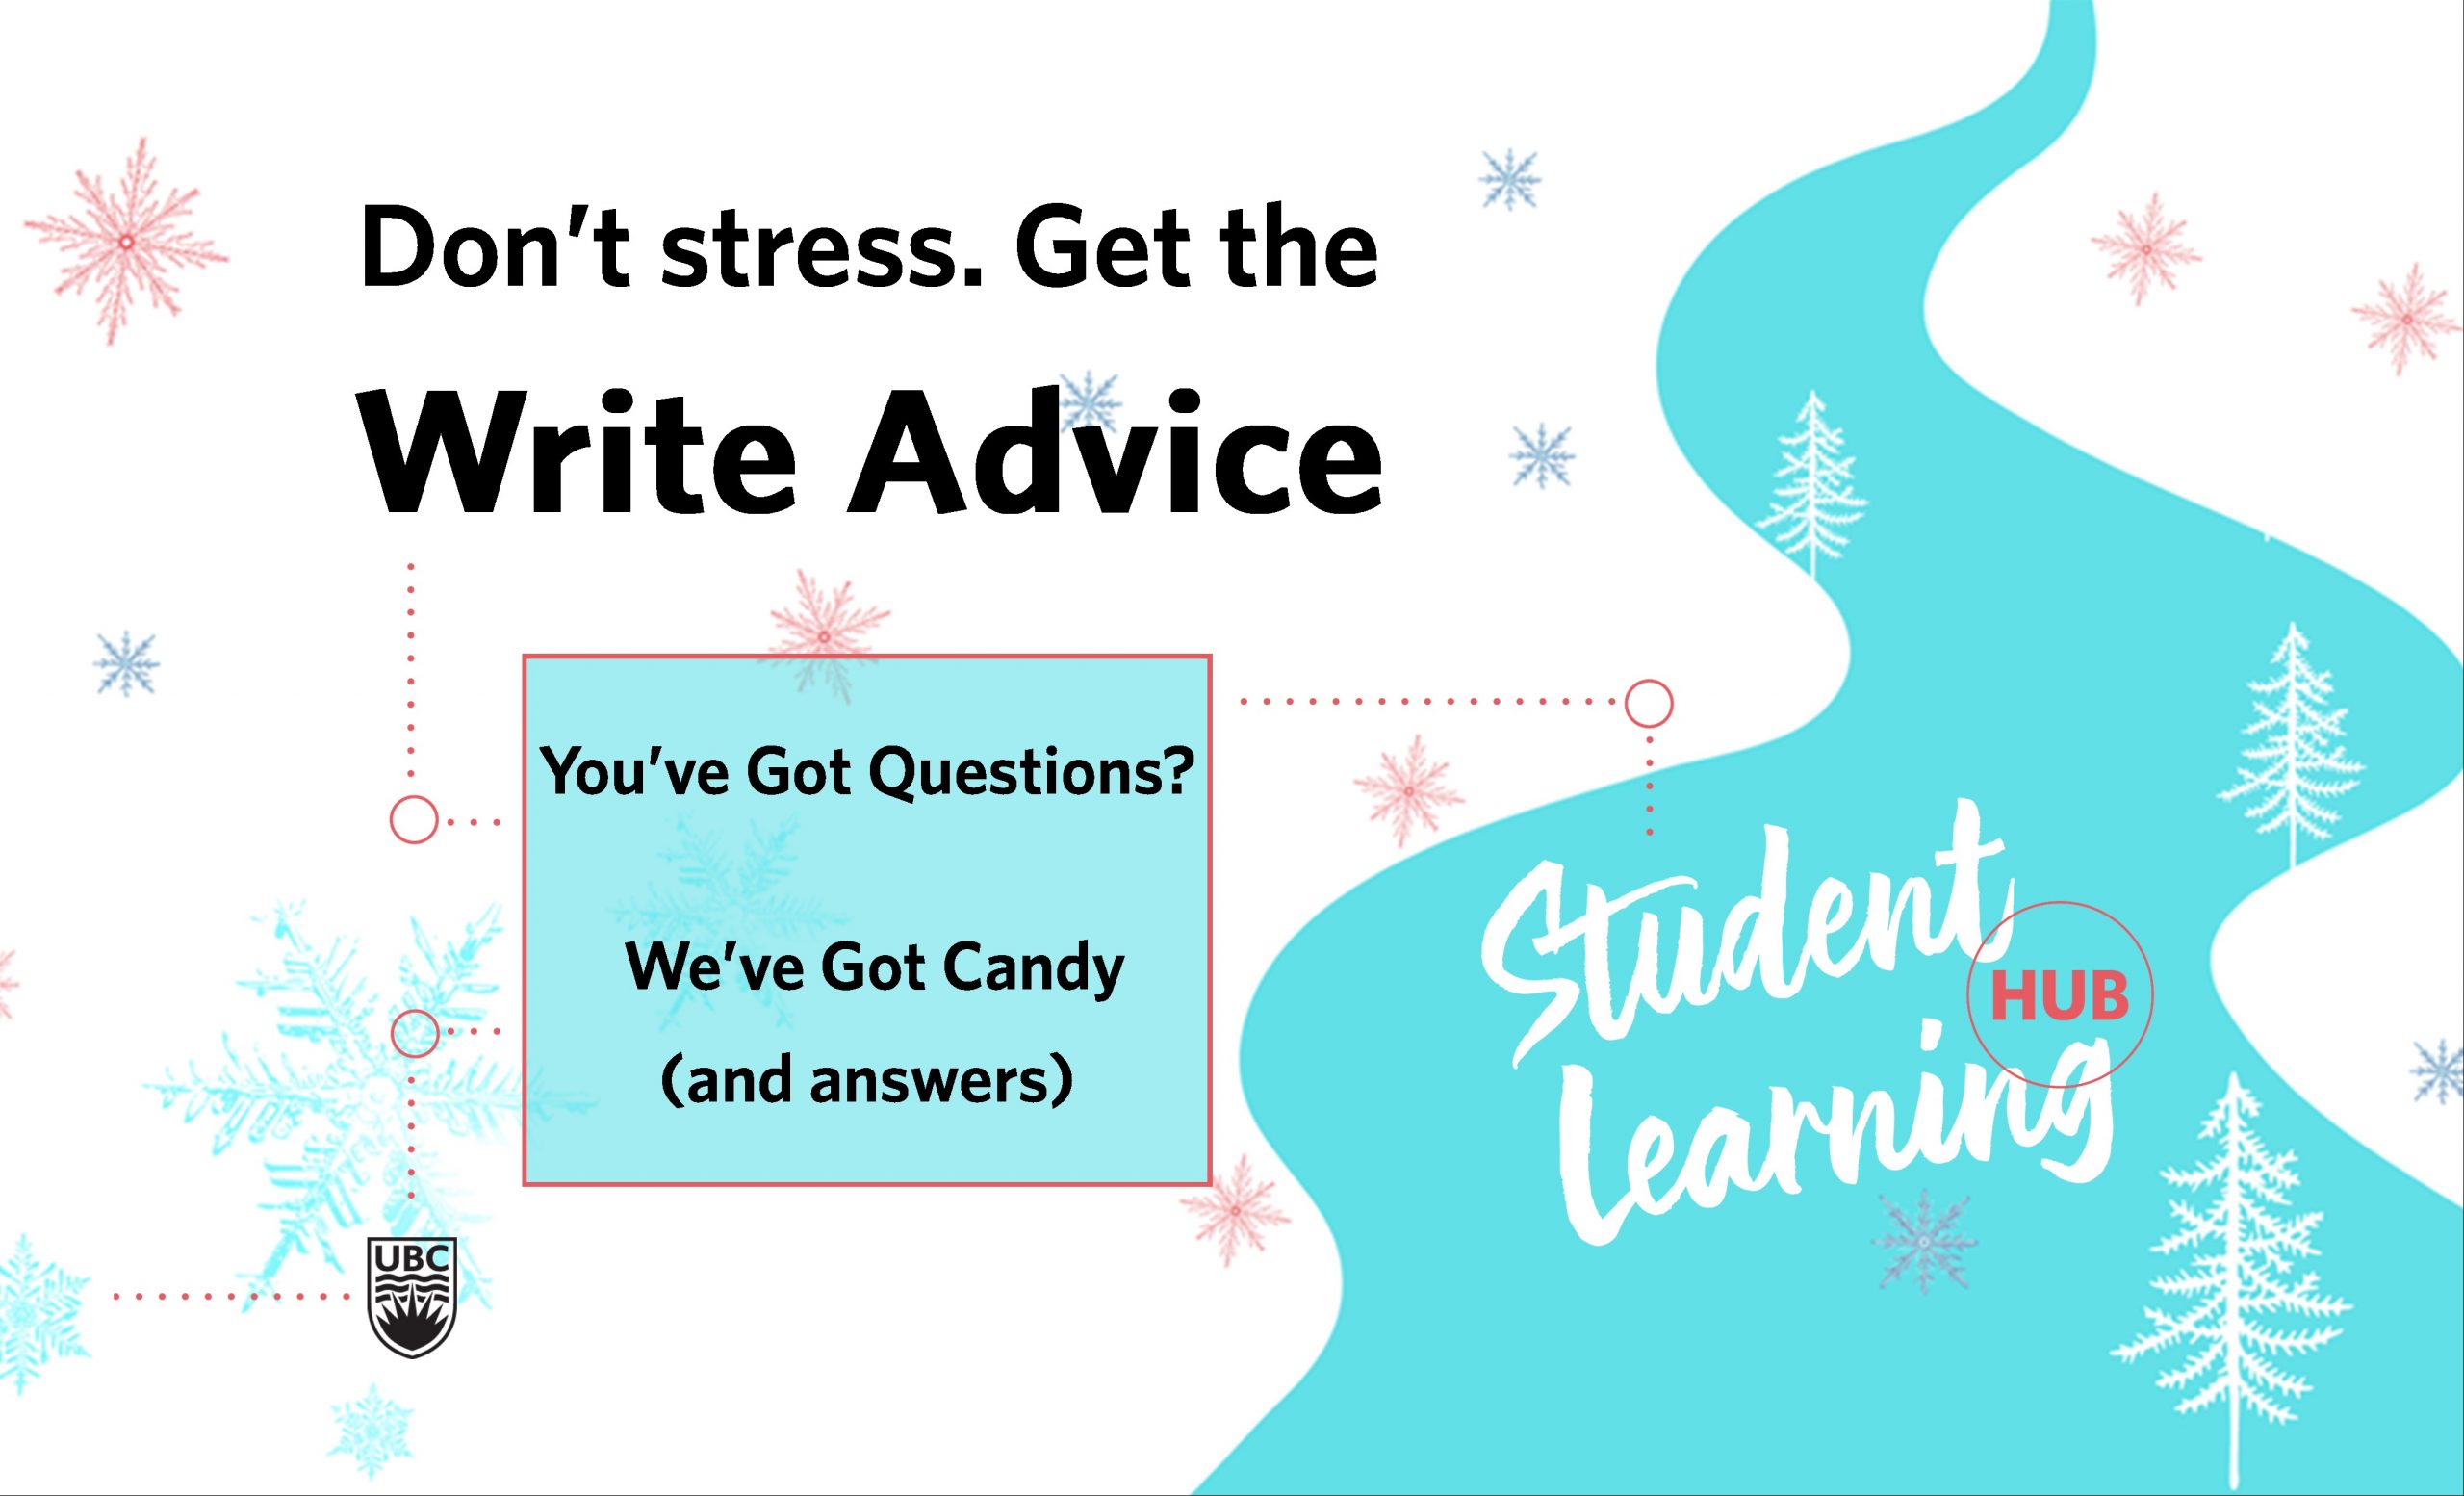 Don't stress. Get the Write Advice. You've got questions? We're got candy (and answers)